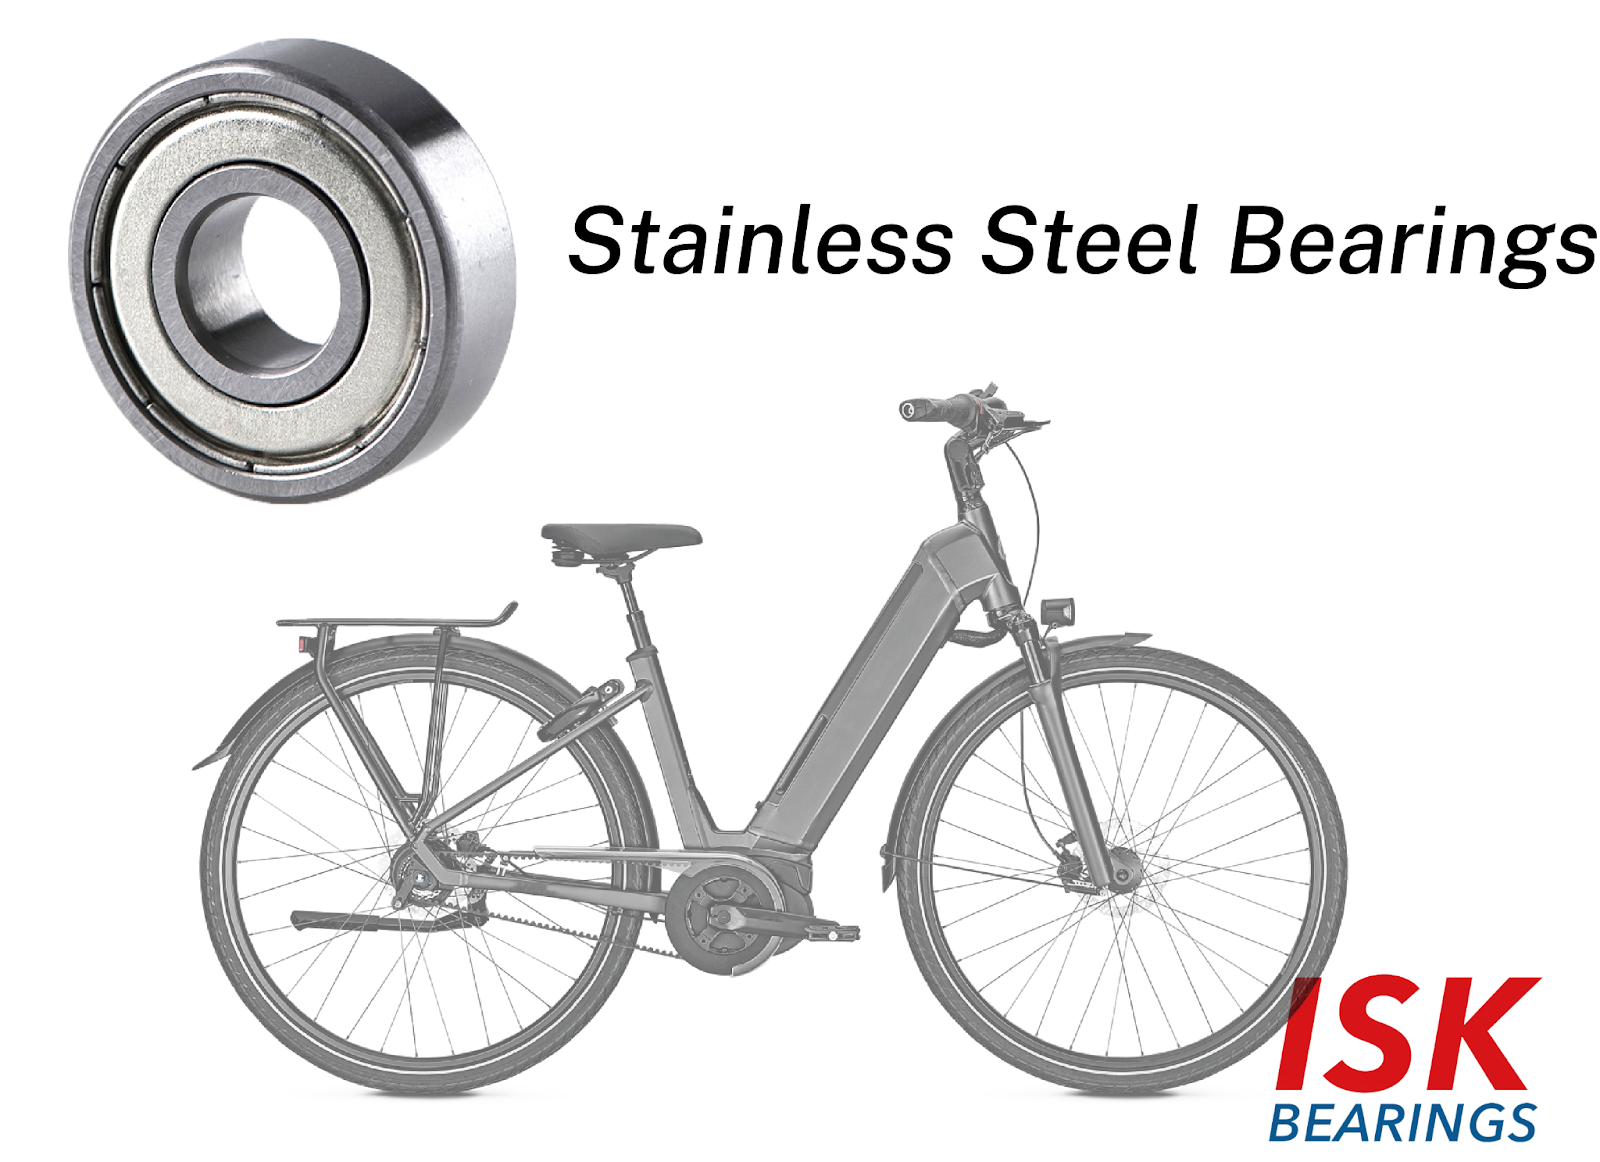 Stainless Steel Bearings for bicycles